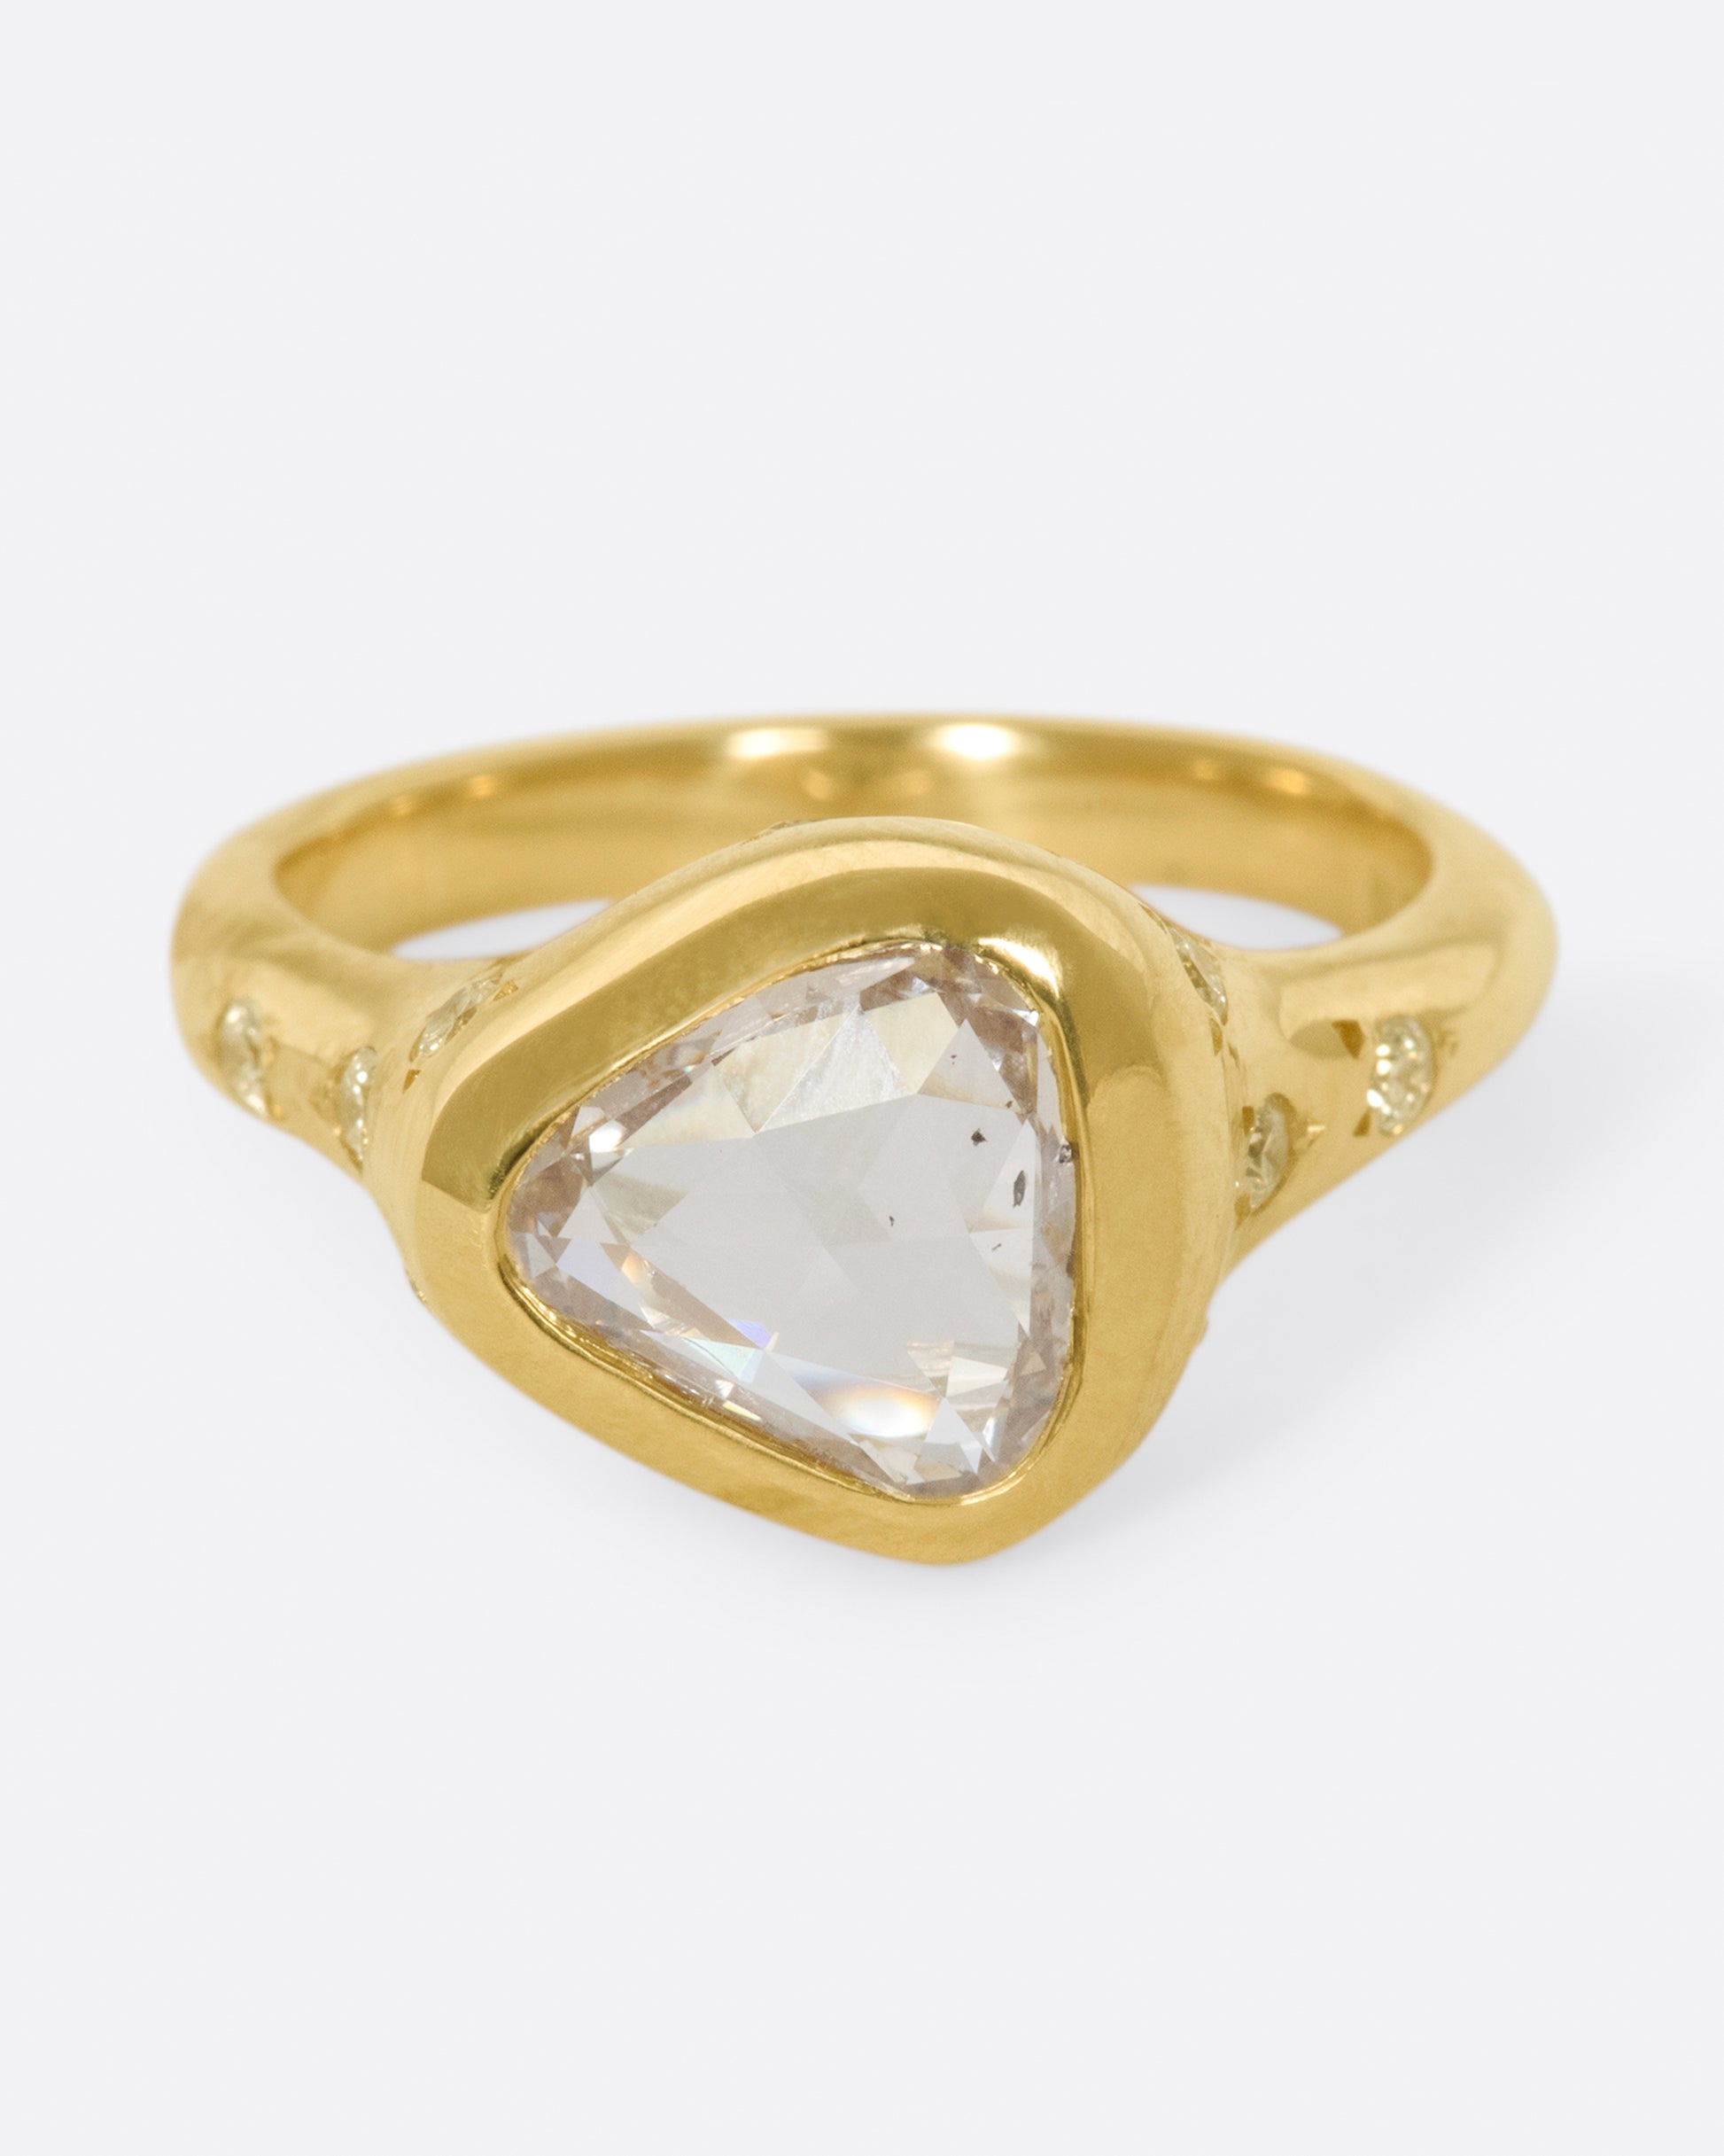 A glorious triangular, rose cut diamond sits on its side giving this ring an east-west sensibility.